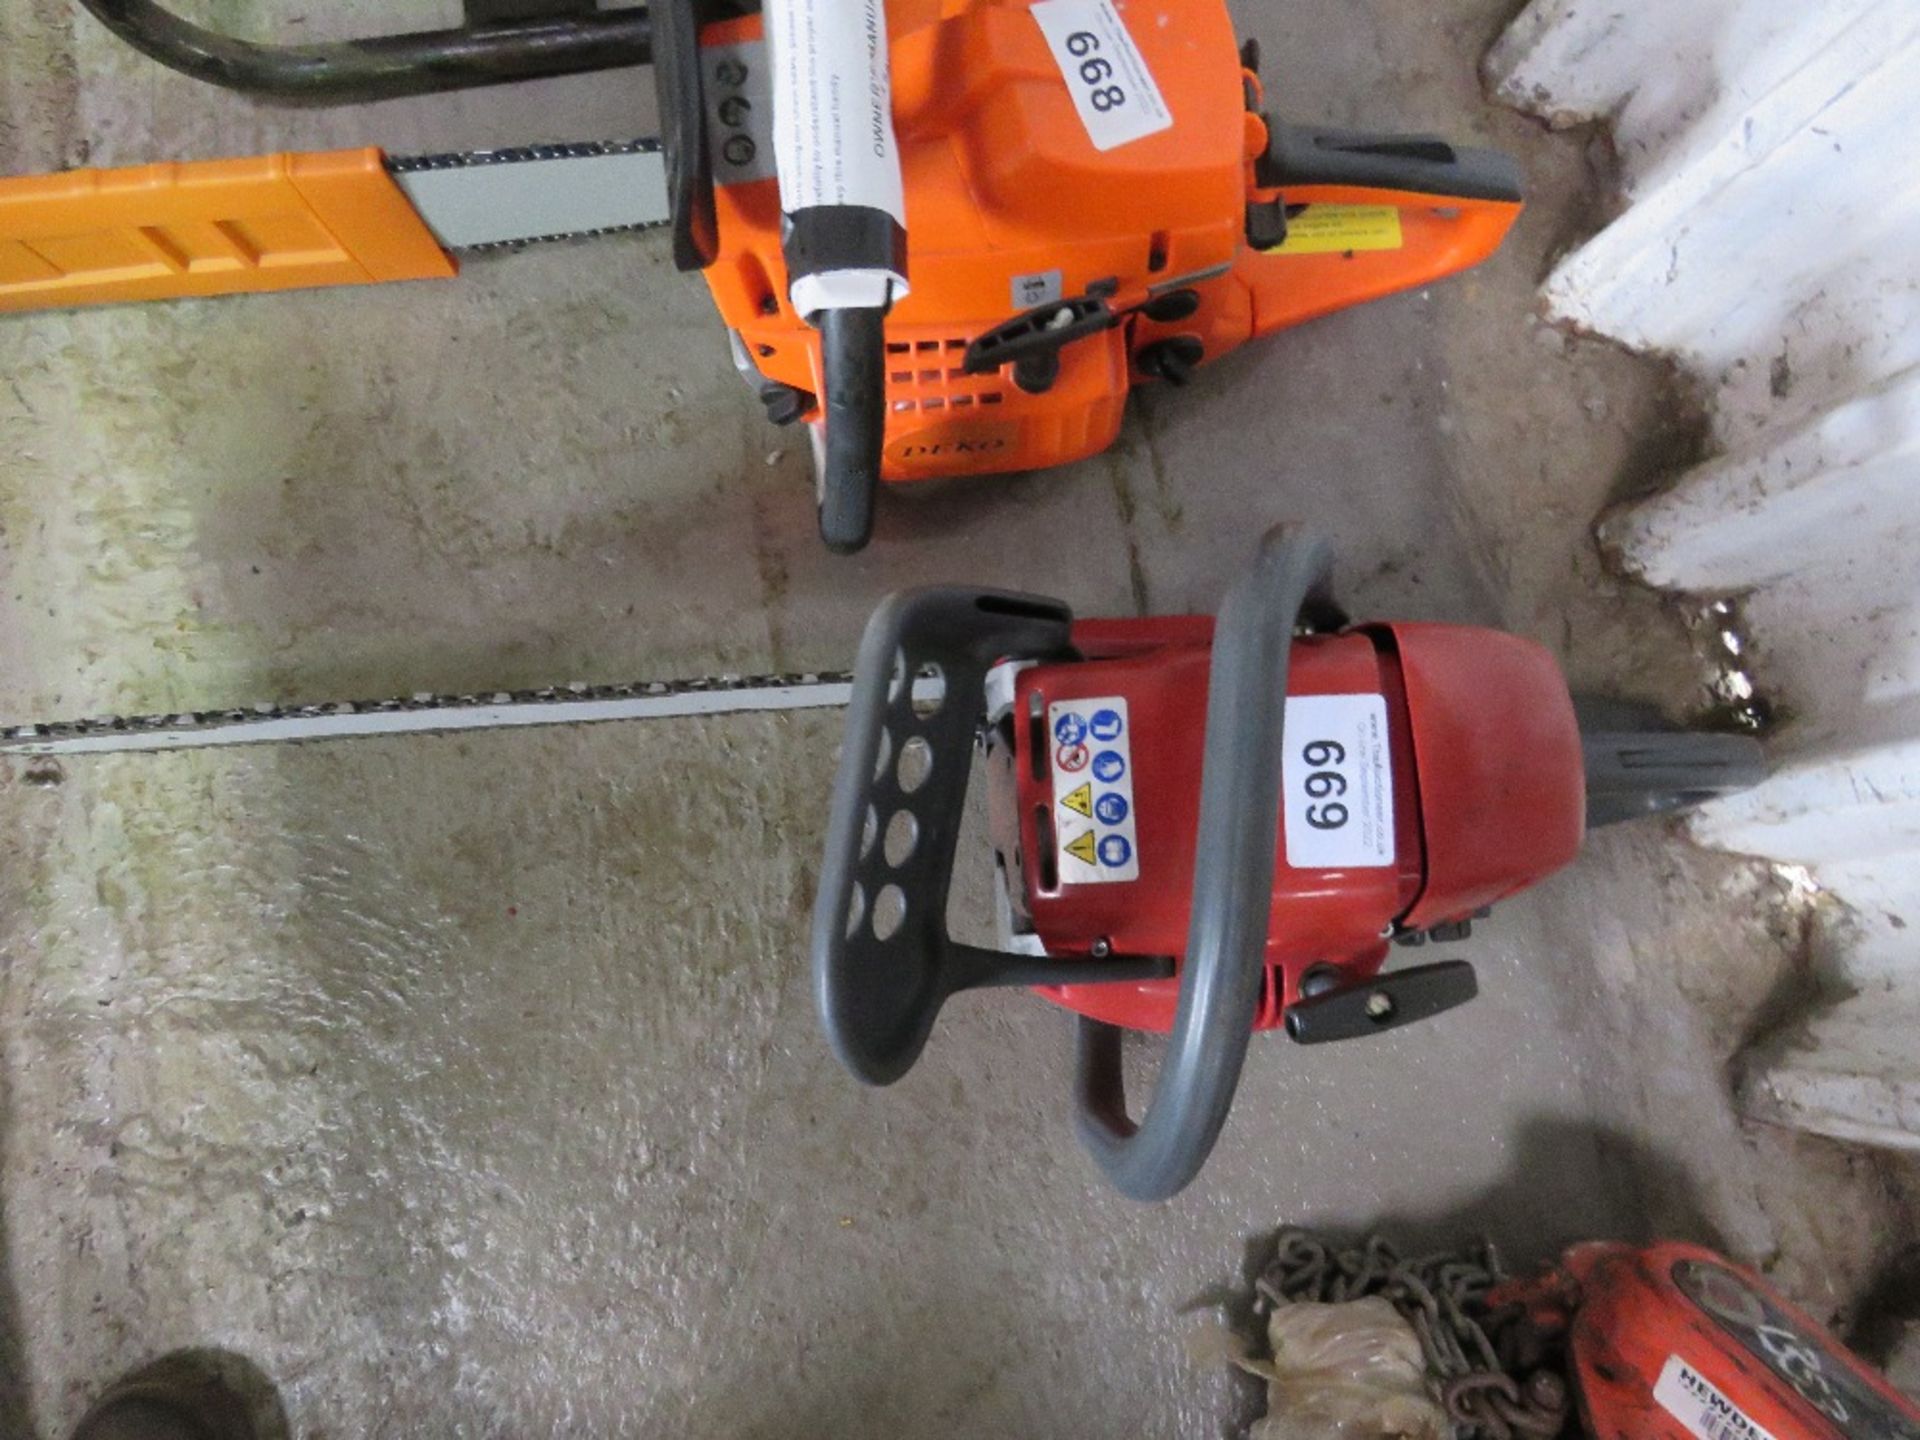 GARDENLINE PETROL ENGINED CHAINSAW. - Image 3 of 3